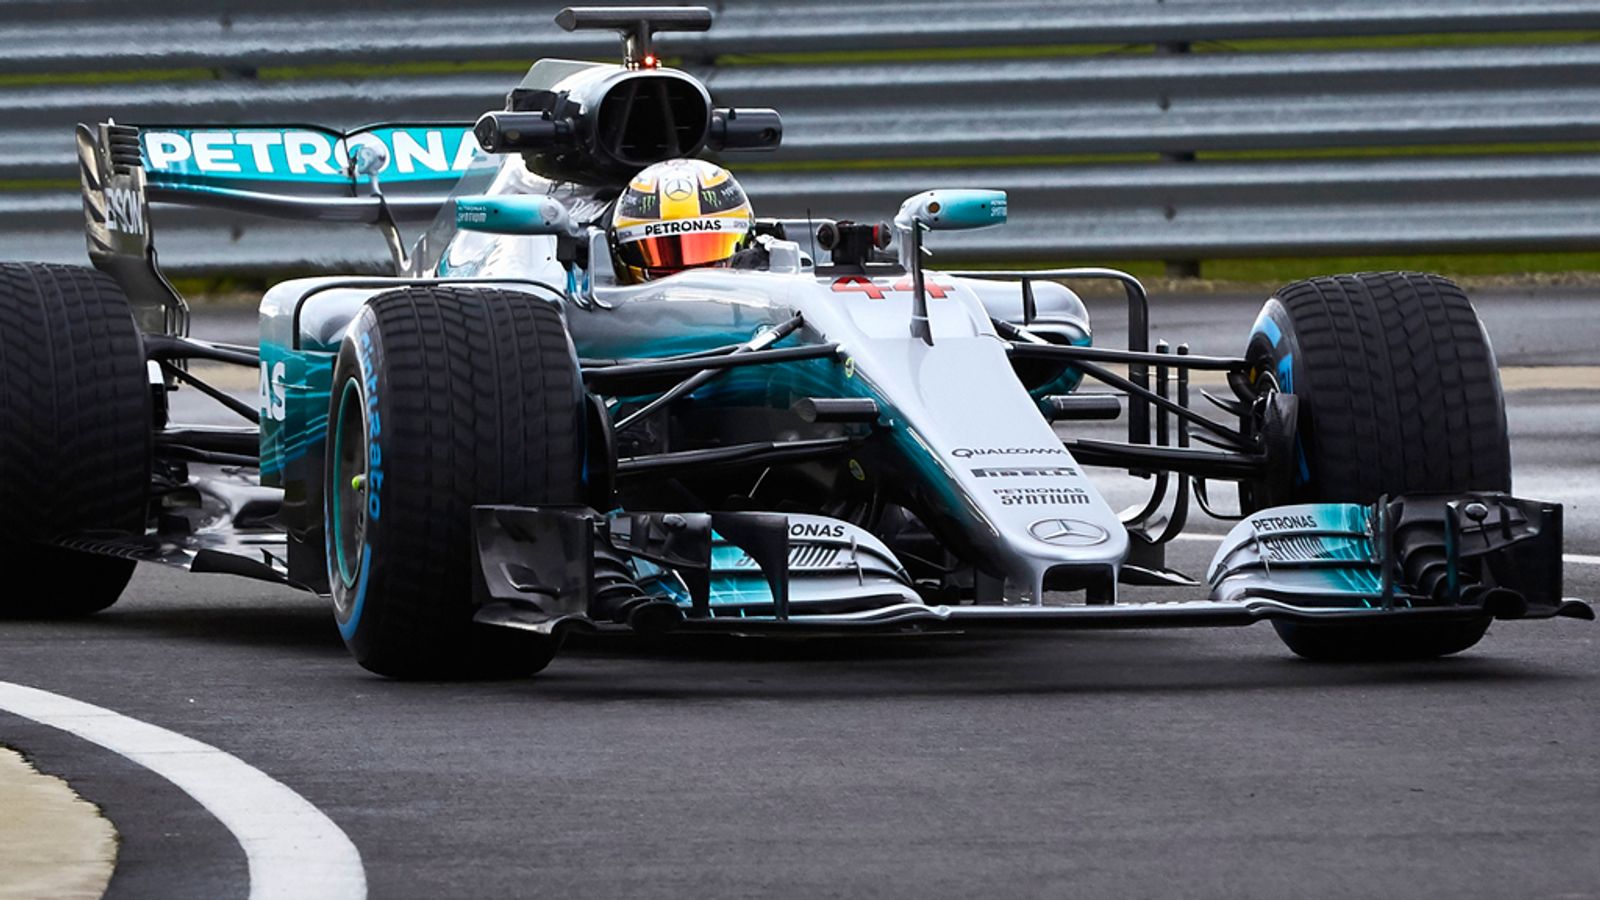 Sky Sports F1 Exclusive: The Mercedes W08 on track | F1 News | Sky 